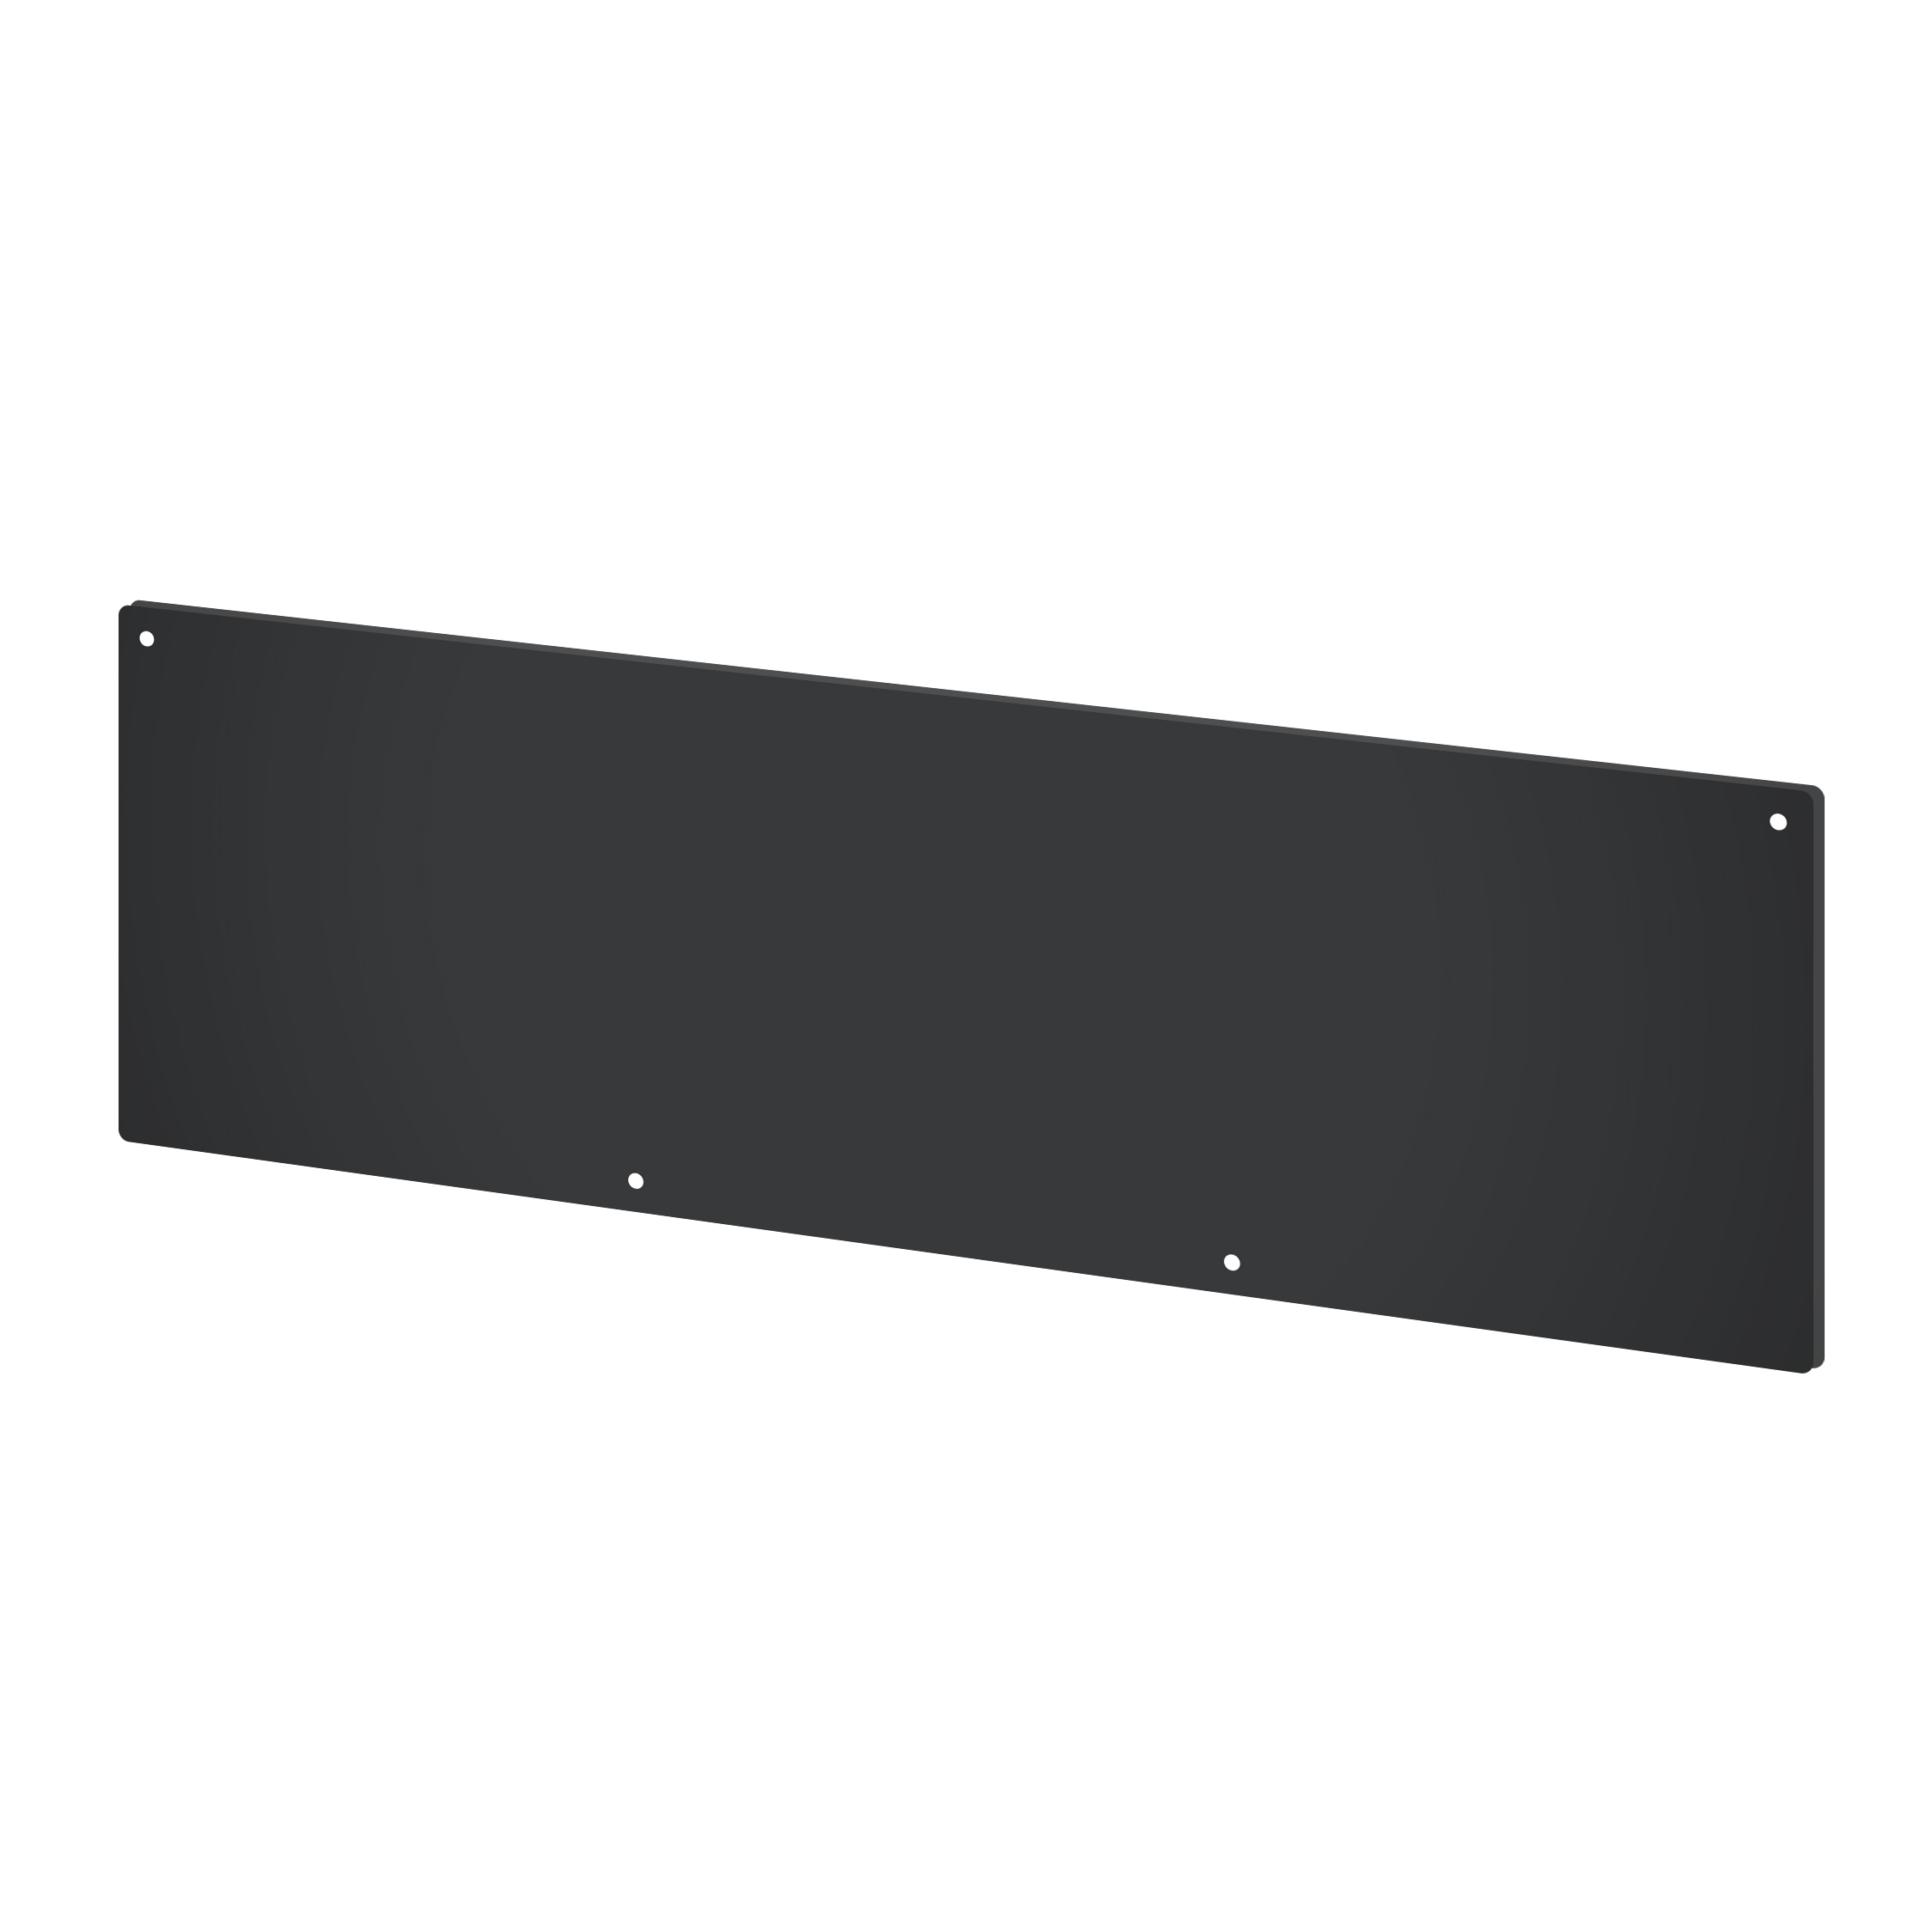 Cover plate DS² 85-108 powder-coated